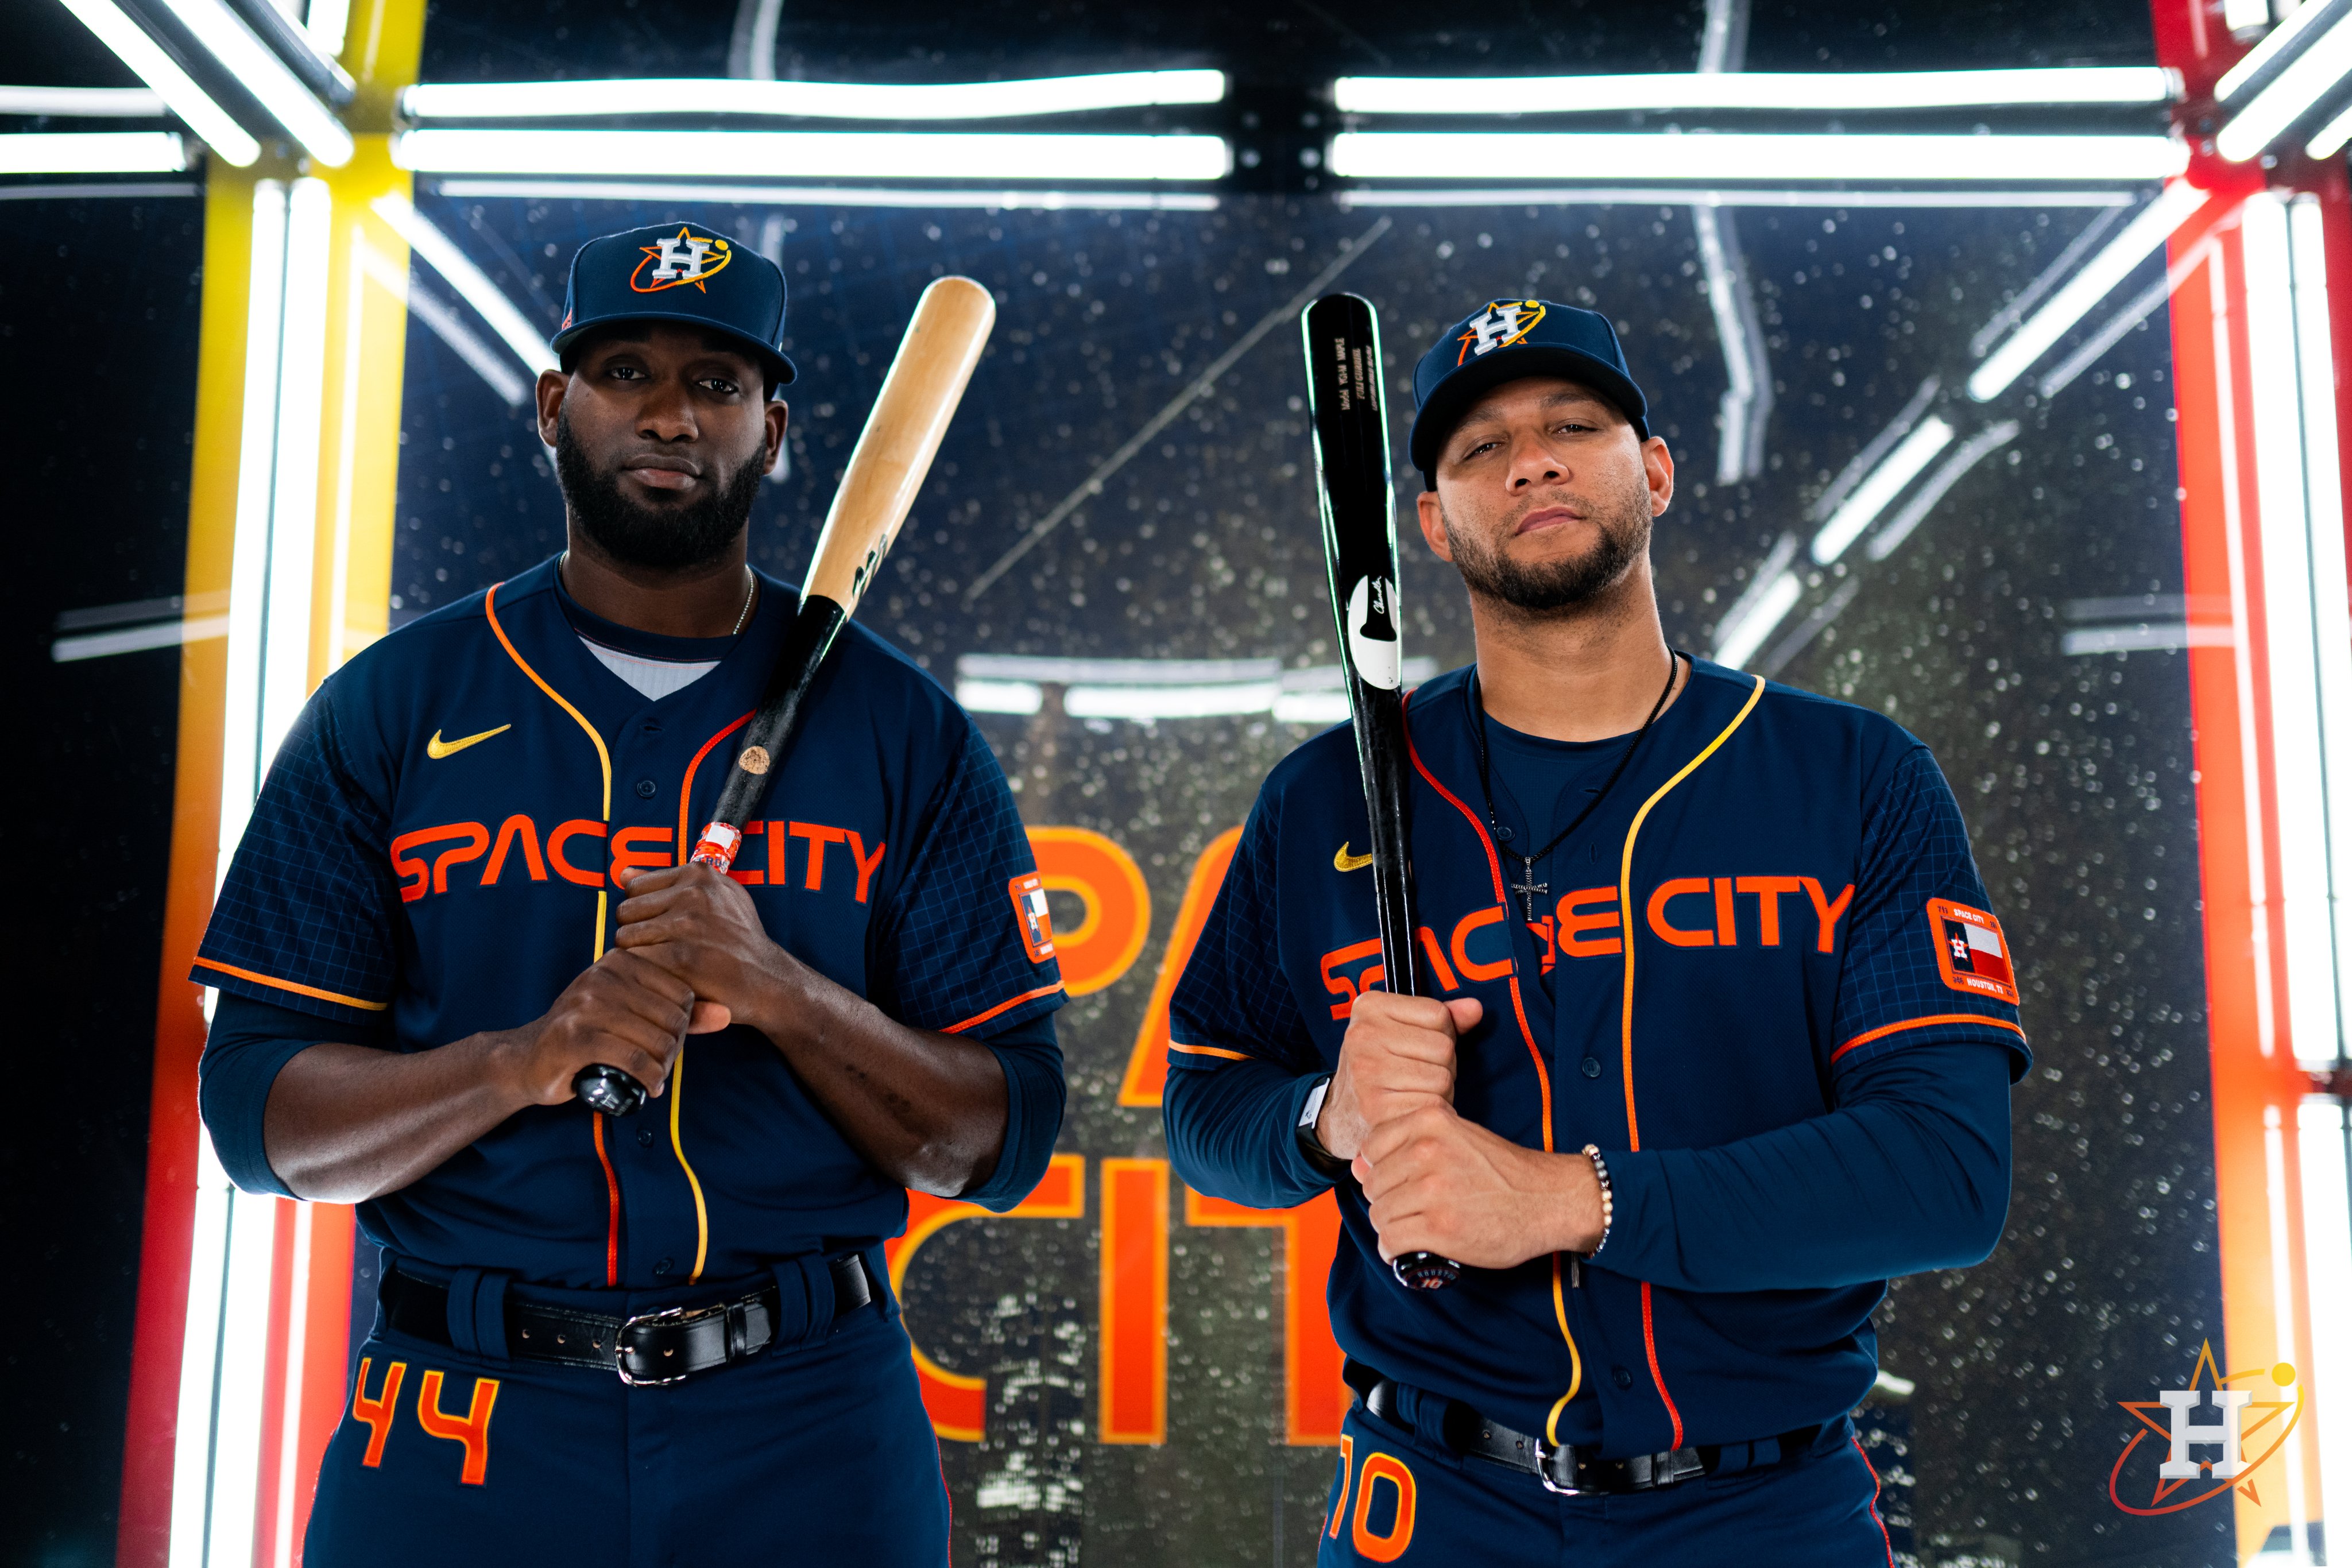 Do the Houston Astros have the best city connect jerseys in MLB